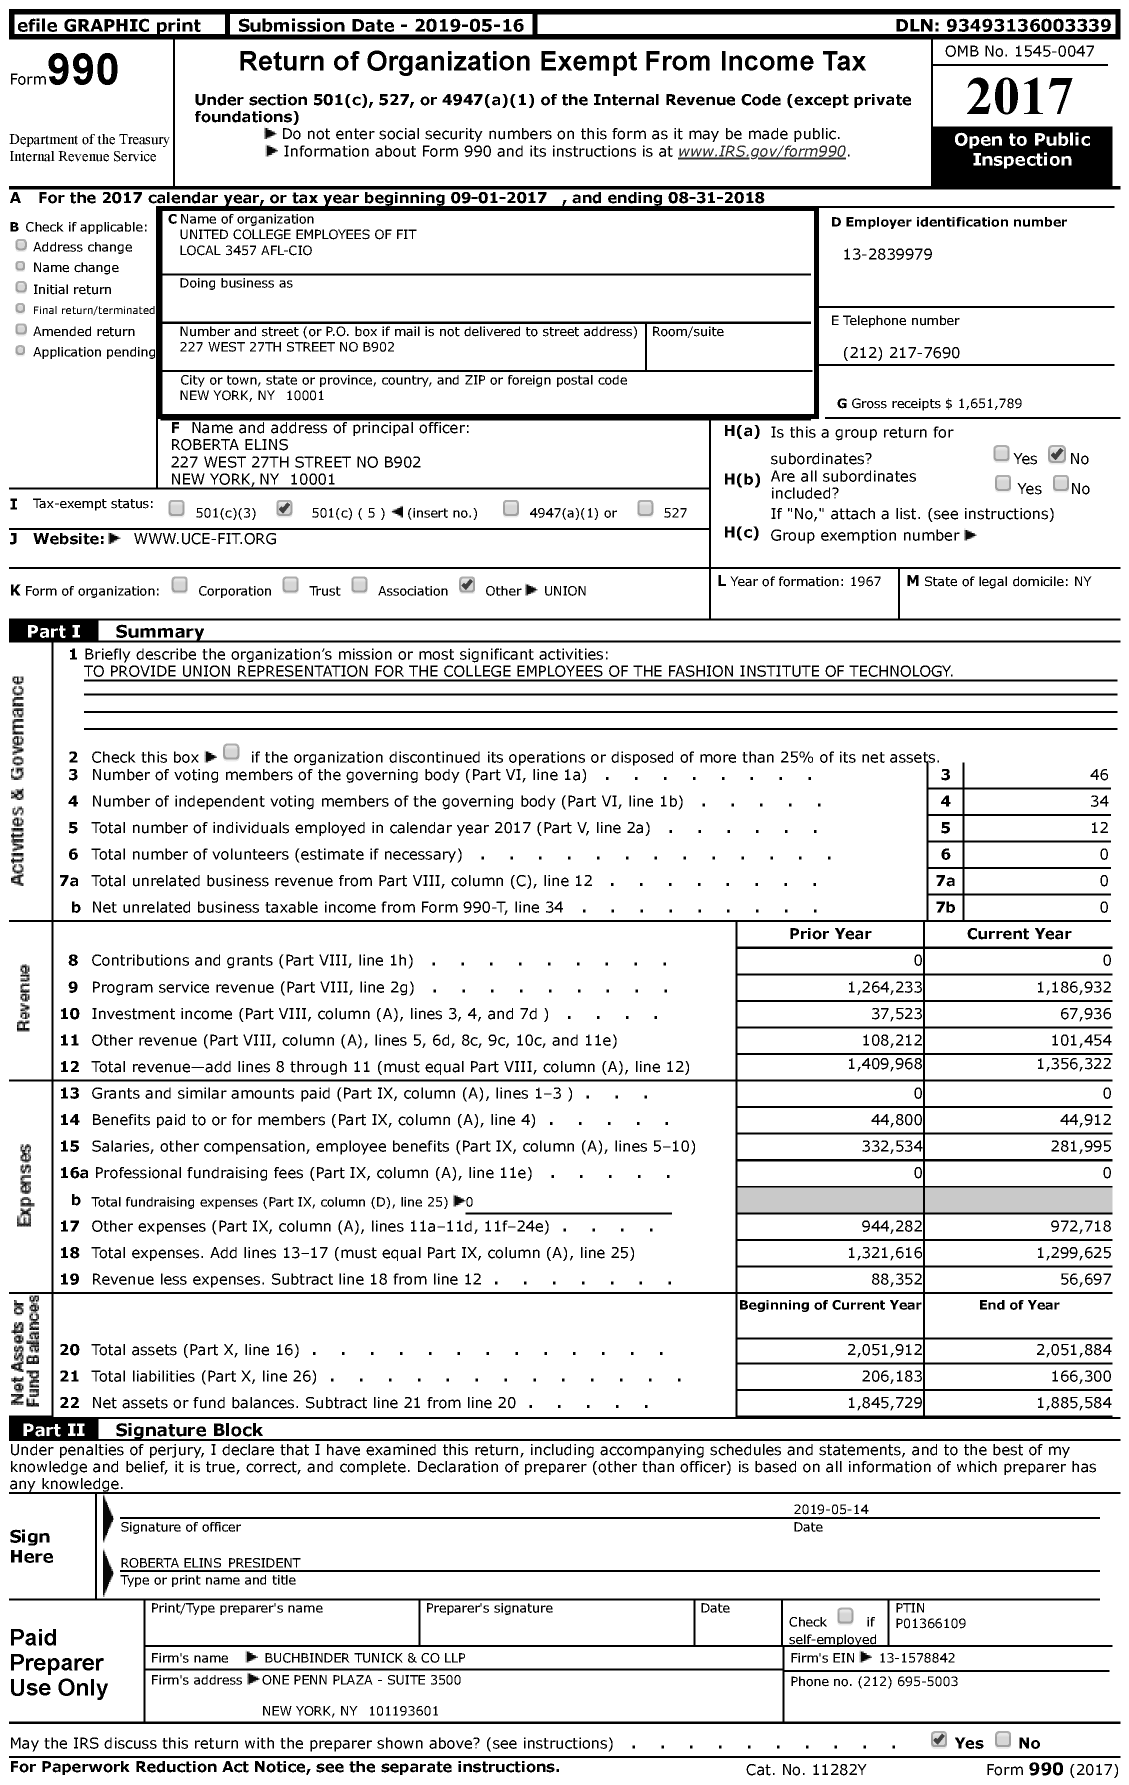 Image of first page of 2017 Form 990 for American Federation of Teachers - 3457 United College Employees of Fi